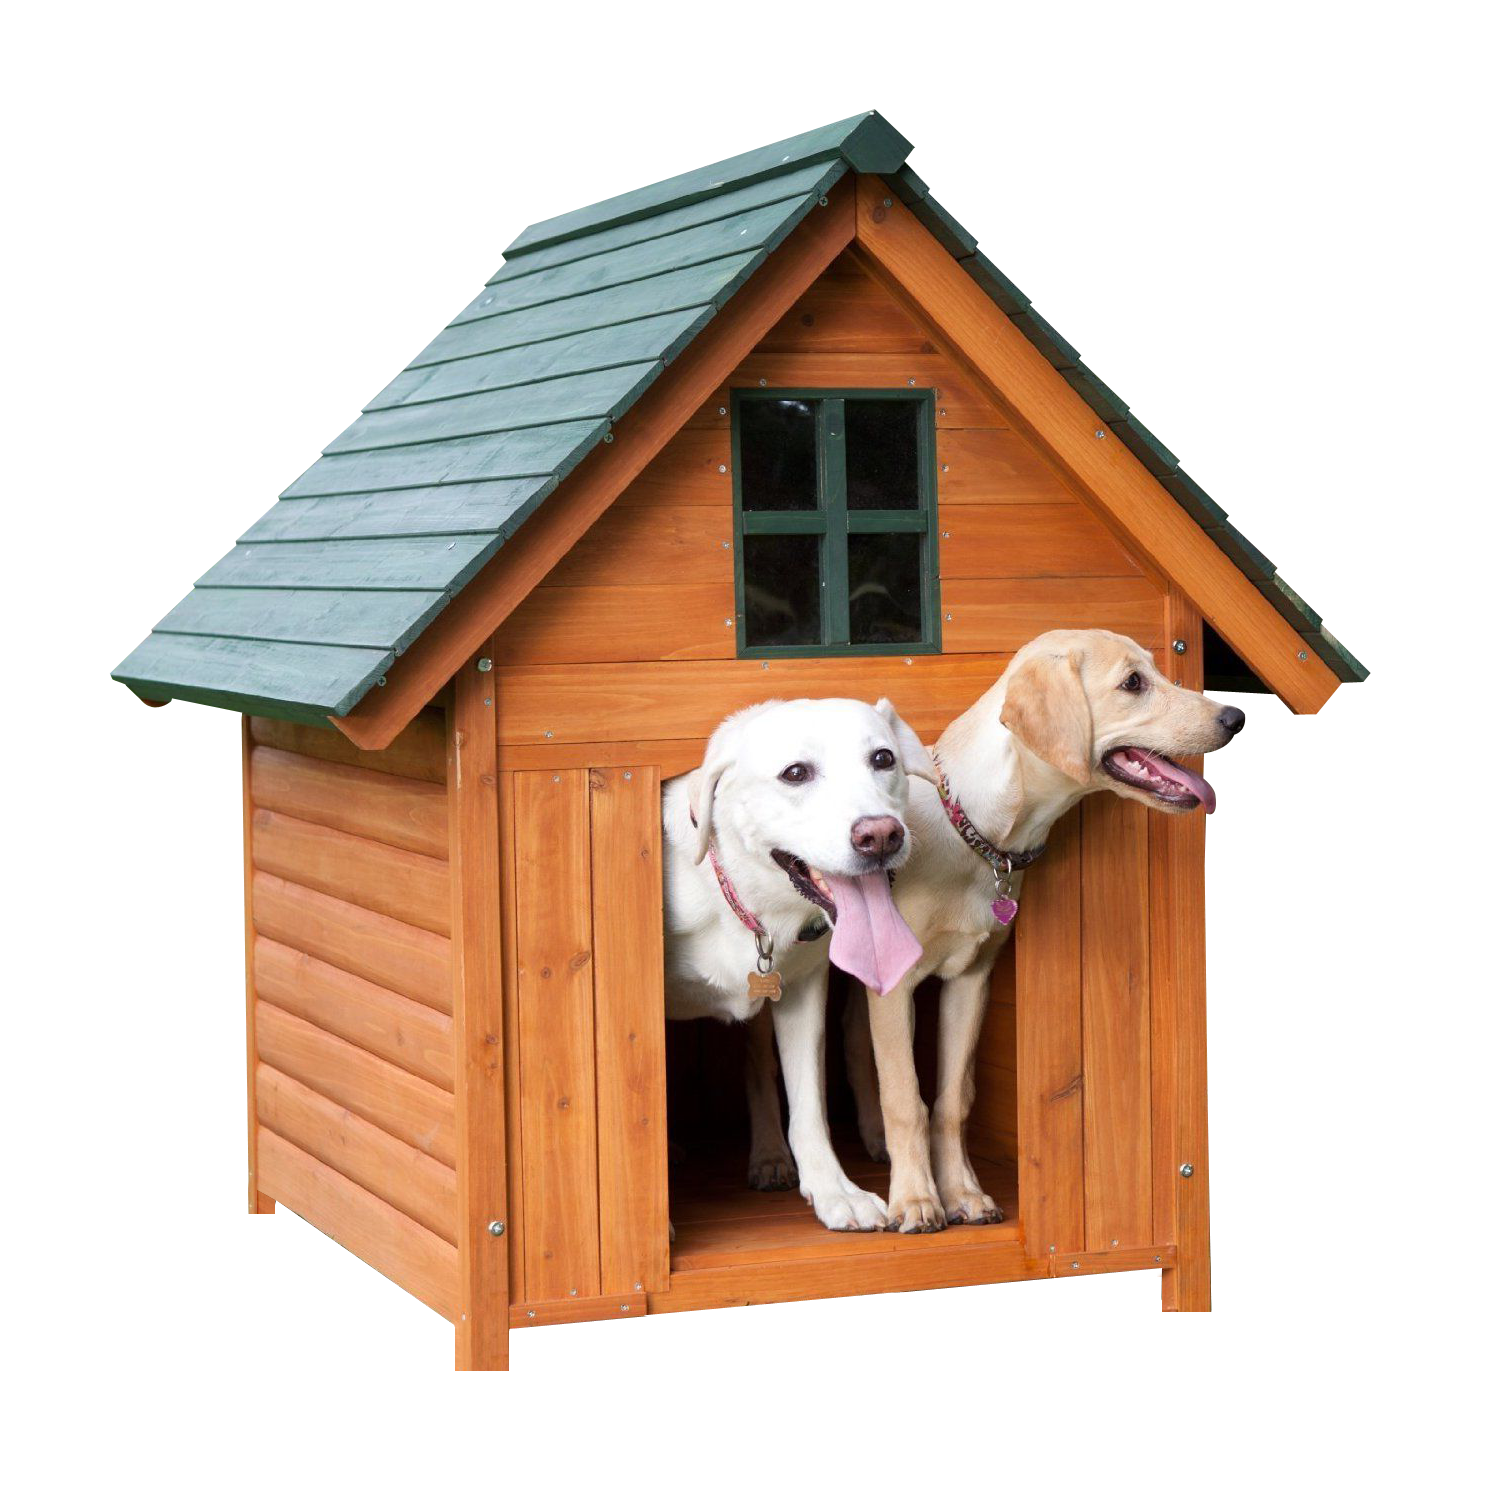 Doghouse clipart dog house. Png image transparent best